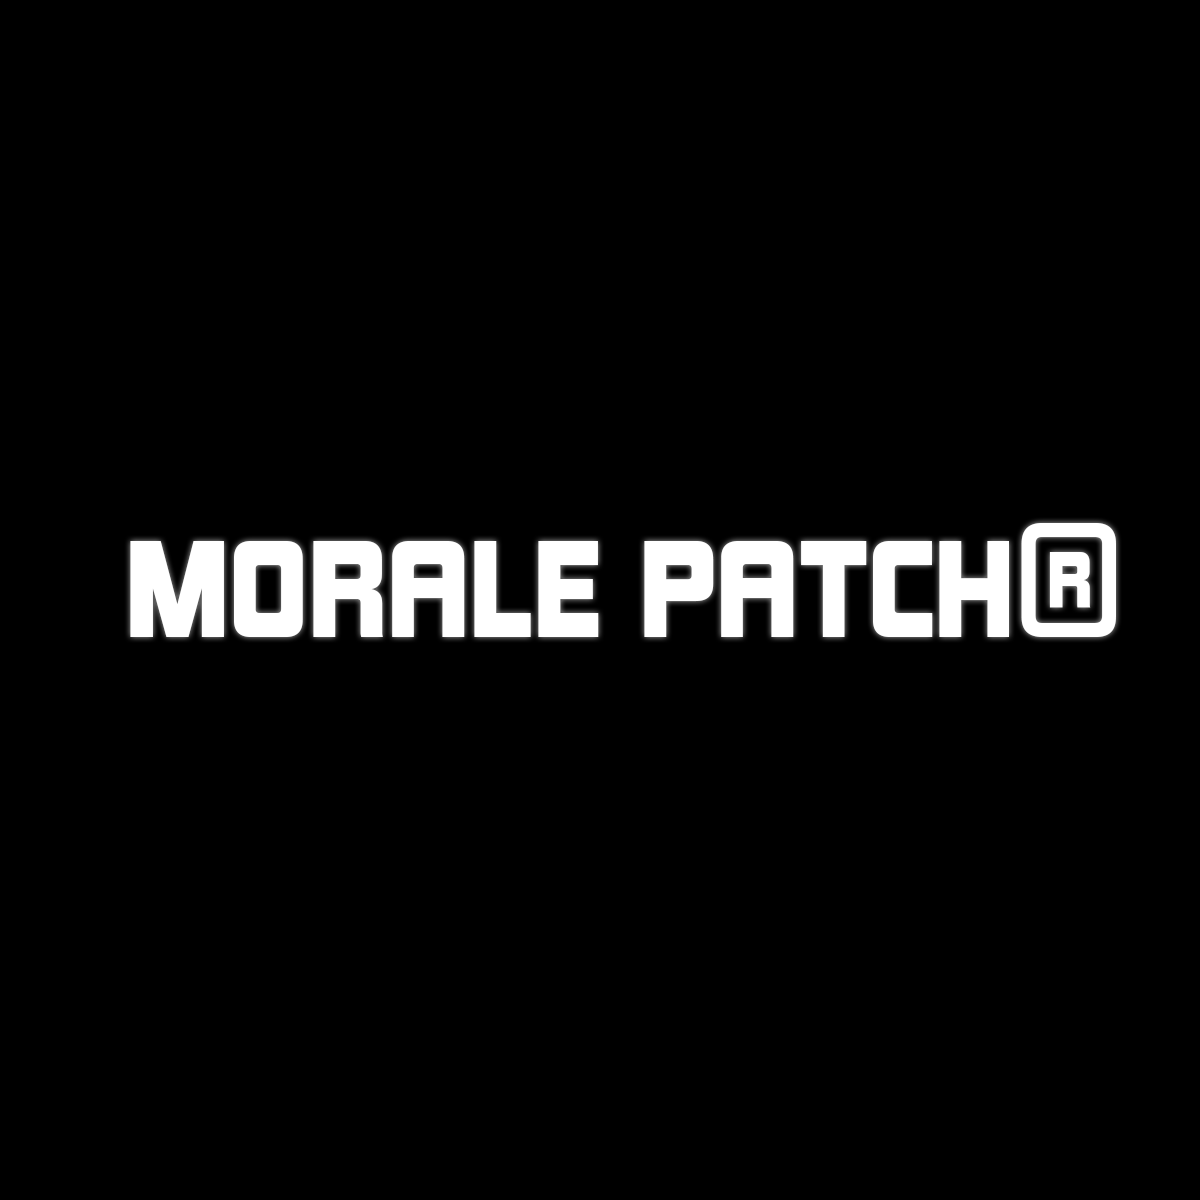 Morale Patch Trademark